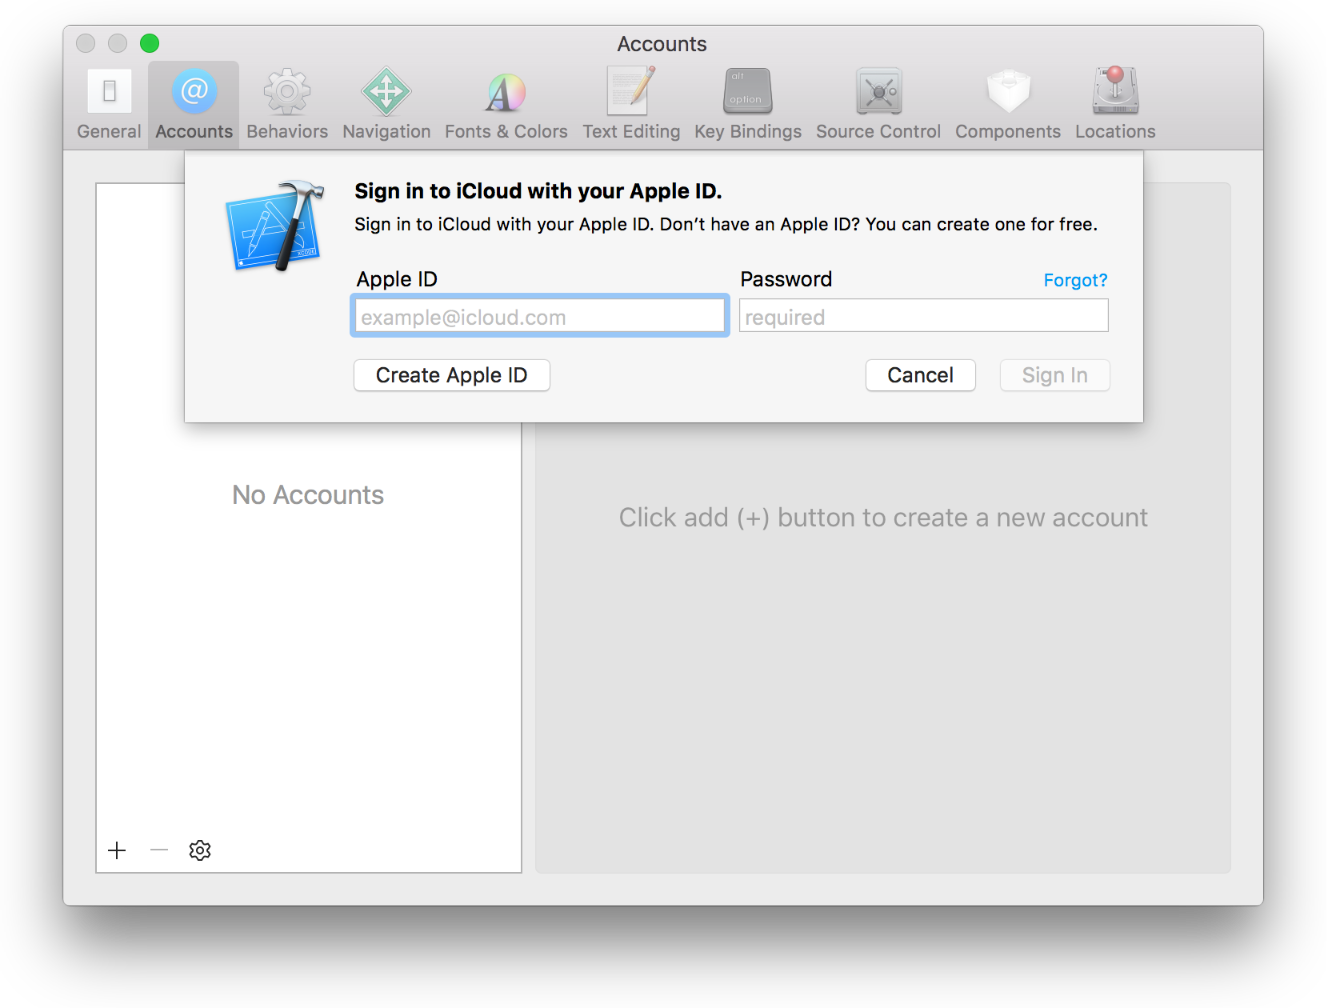 Sign in to Xcode